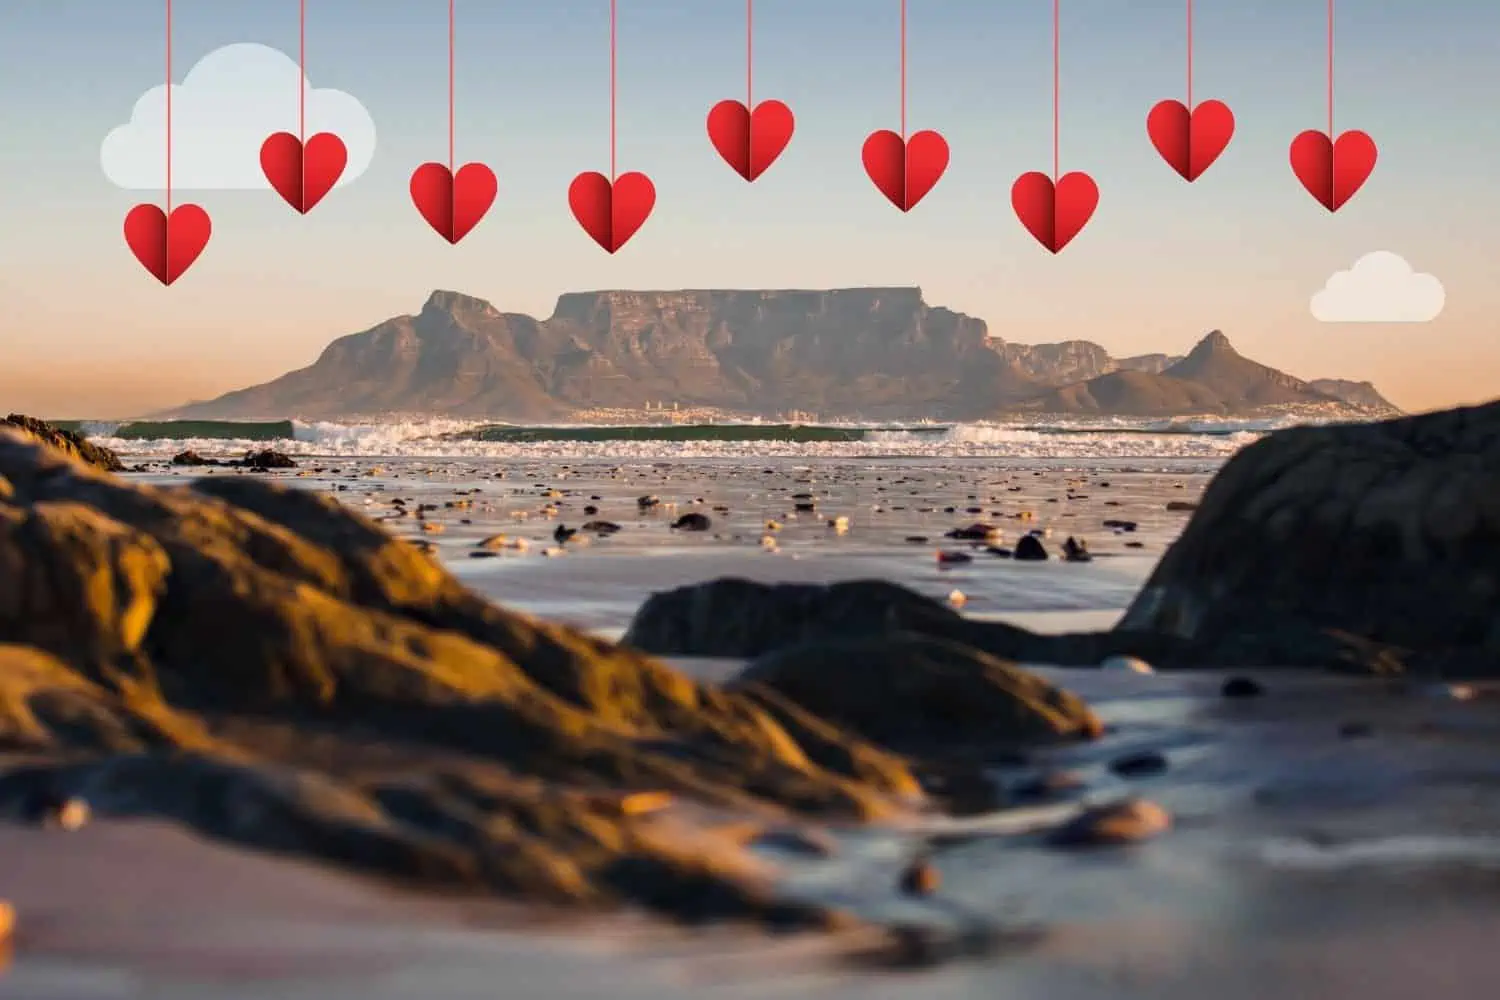 Looking for the perfect V-day plans? Here are 6 fun date ideas in Cape Town!